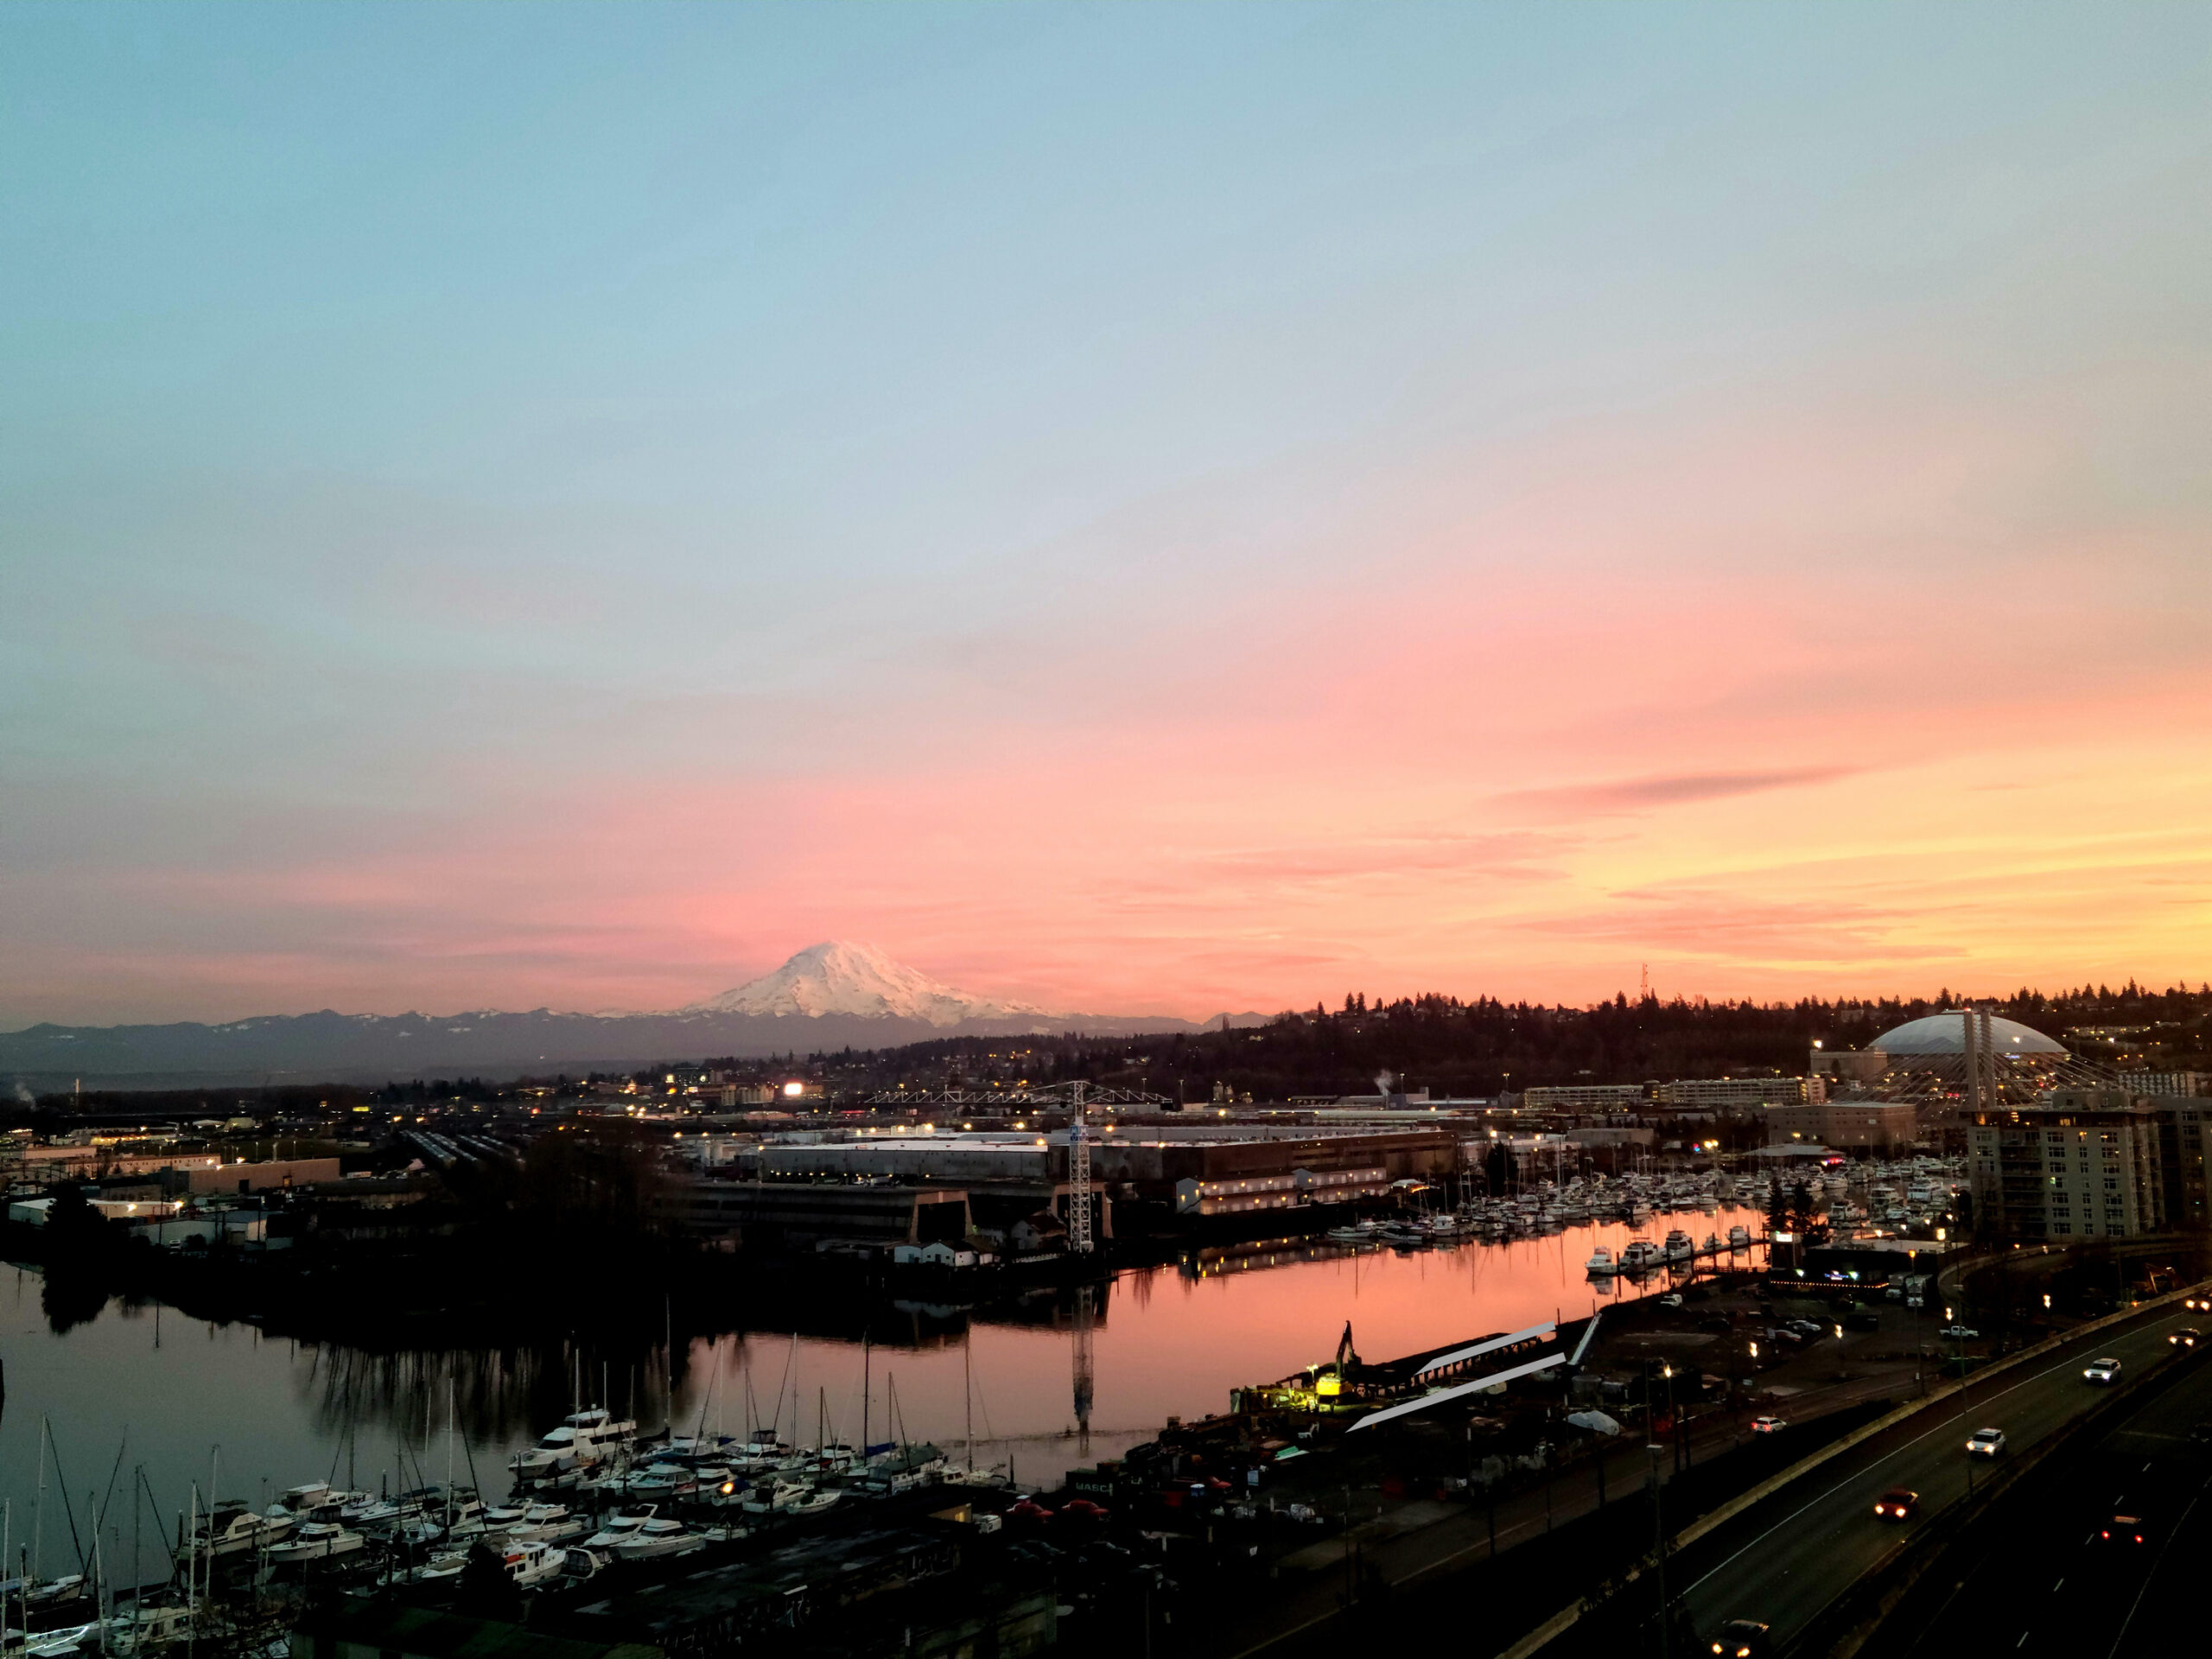 Wow pic of Tacoma